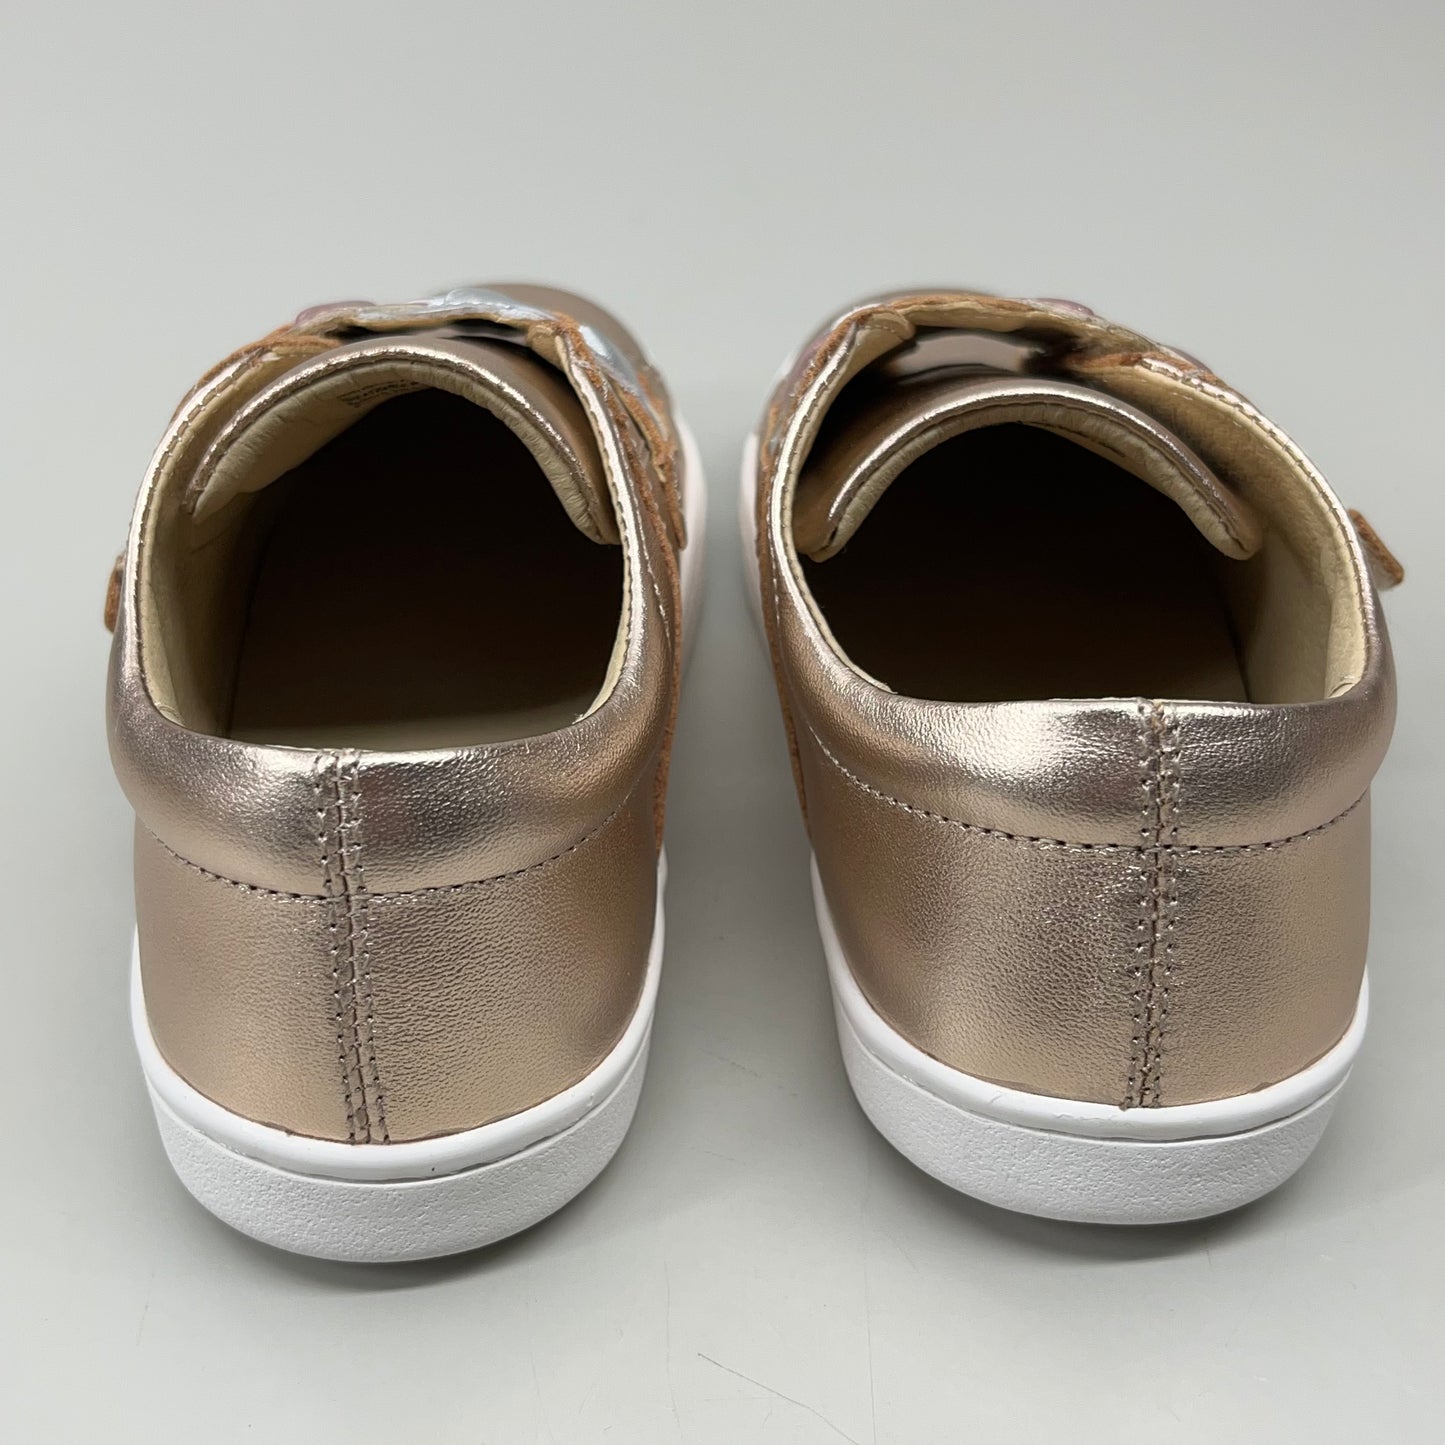 OLD SOLES Igster Sneakers Kid's Leather Shoe Sz 32 US 1 Copper/Silver/Pink Frost #6132